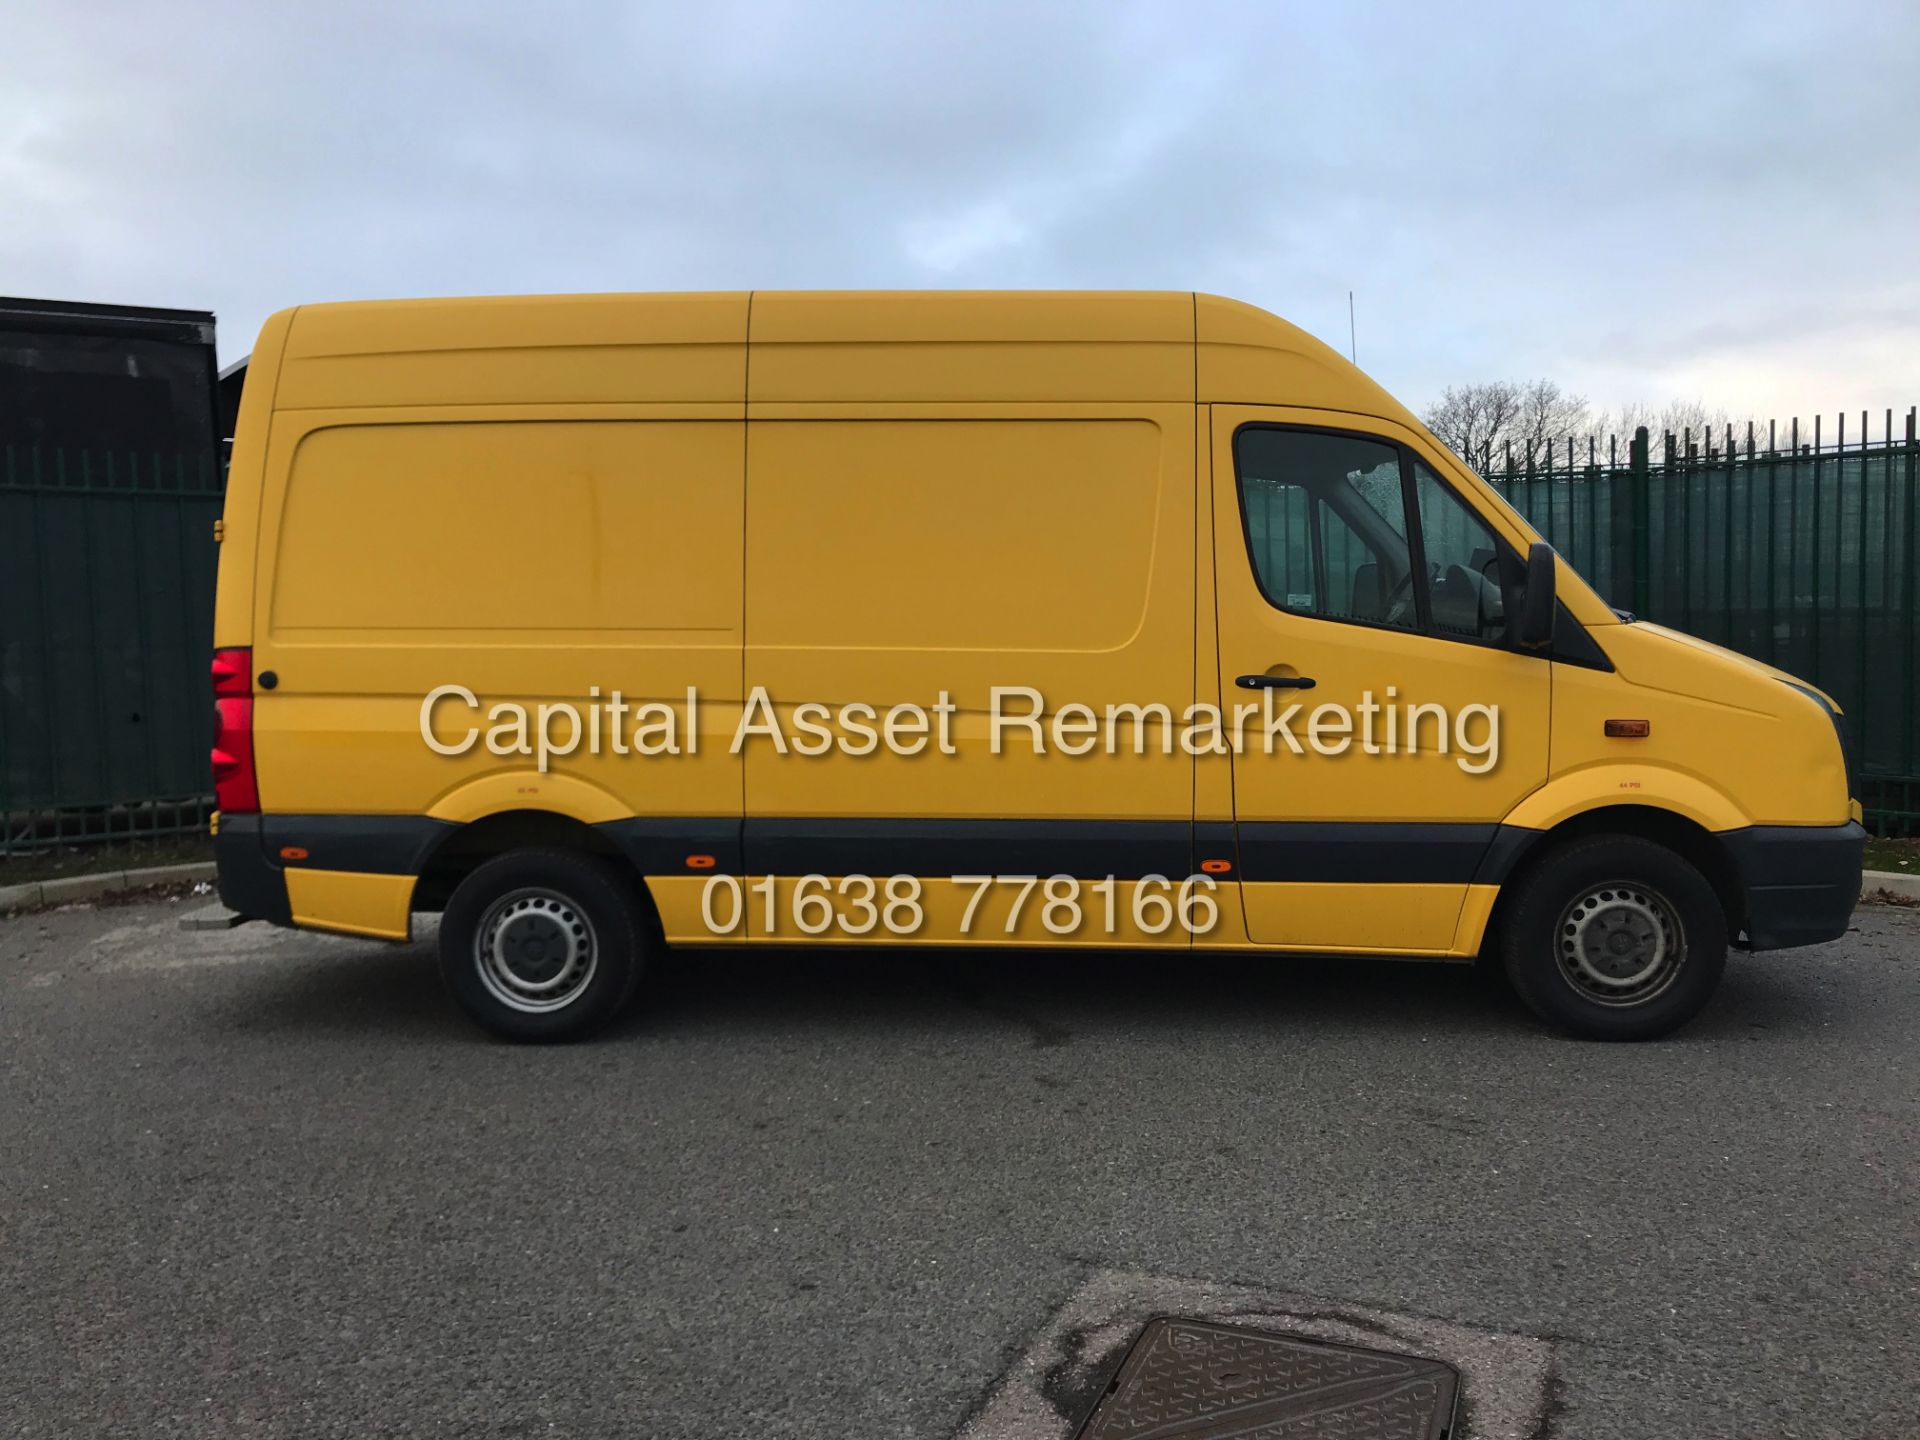 (On Sale) VOLKSWAGEN CRAFTER 2.0TDI CR35 "136BHP" MWB (2014 MODEL) 1 OWNER - AIR CON - FSH - Image 6 of 10